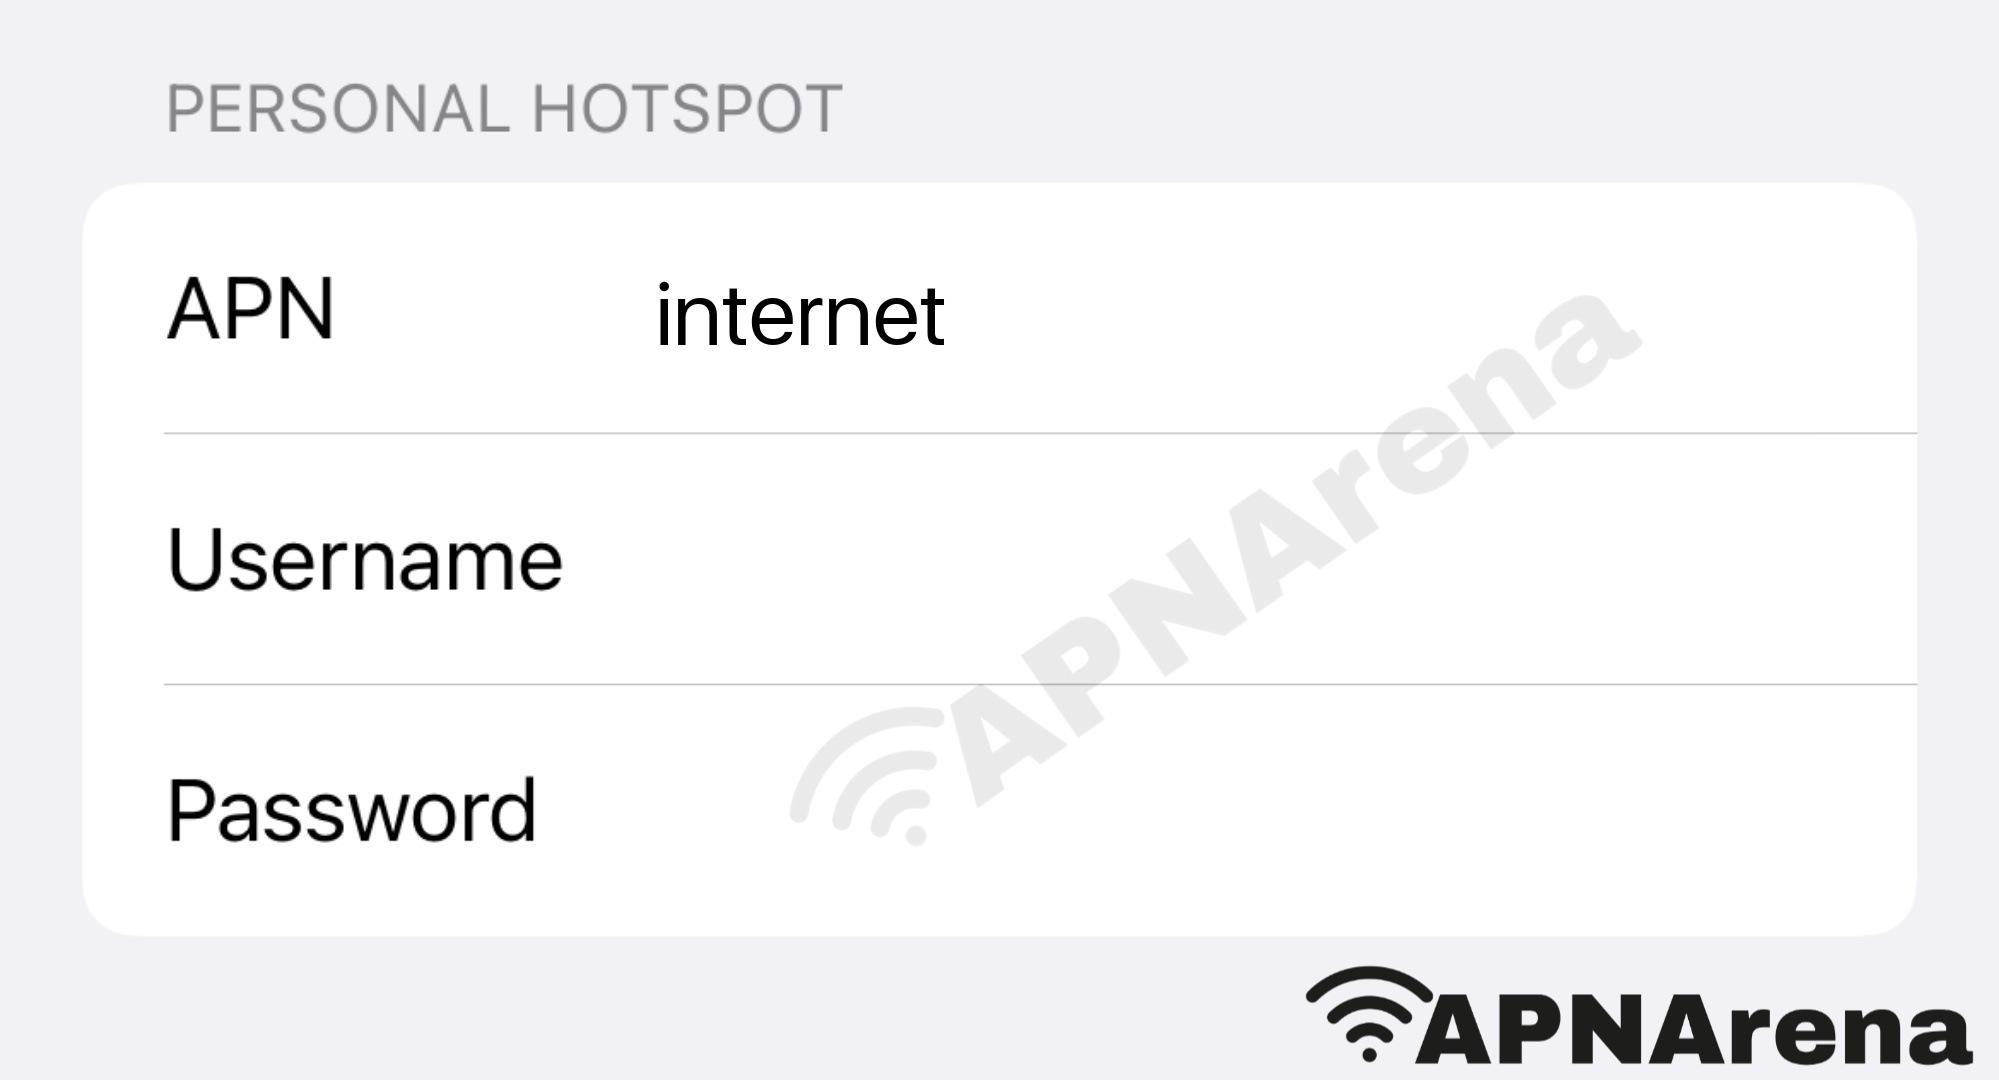 AlwaysOnline Wireless Personal Hotspot Settings for iPhone